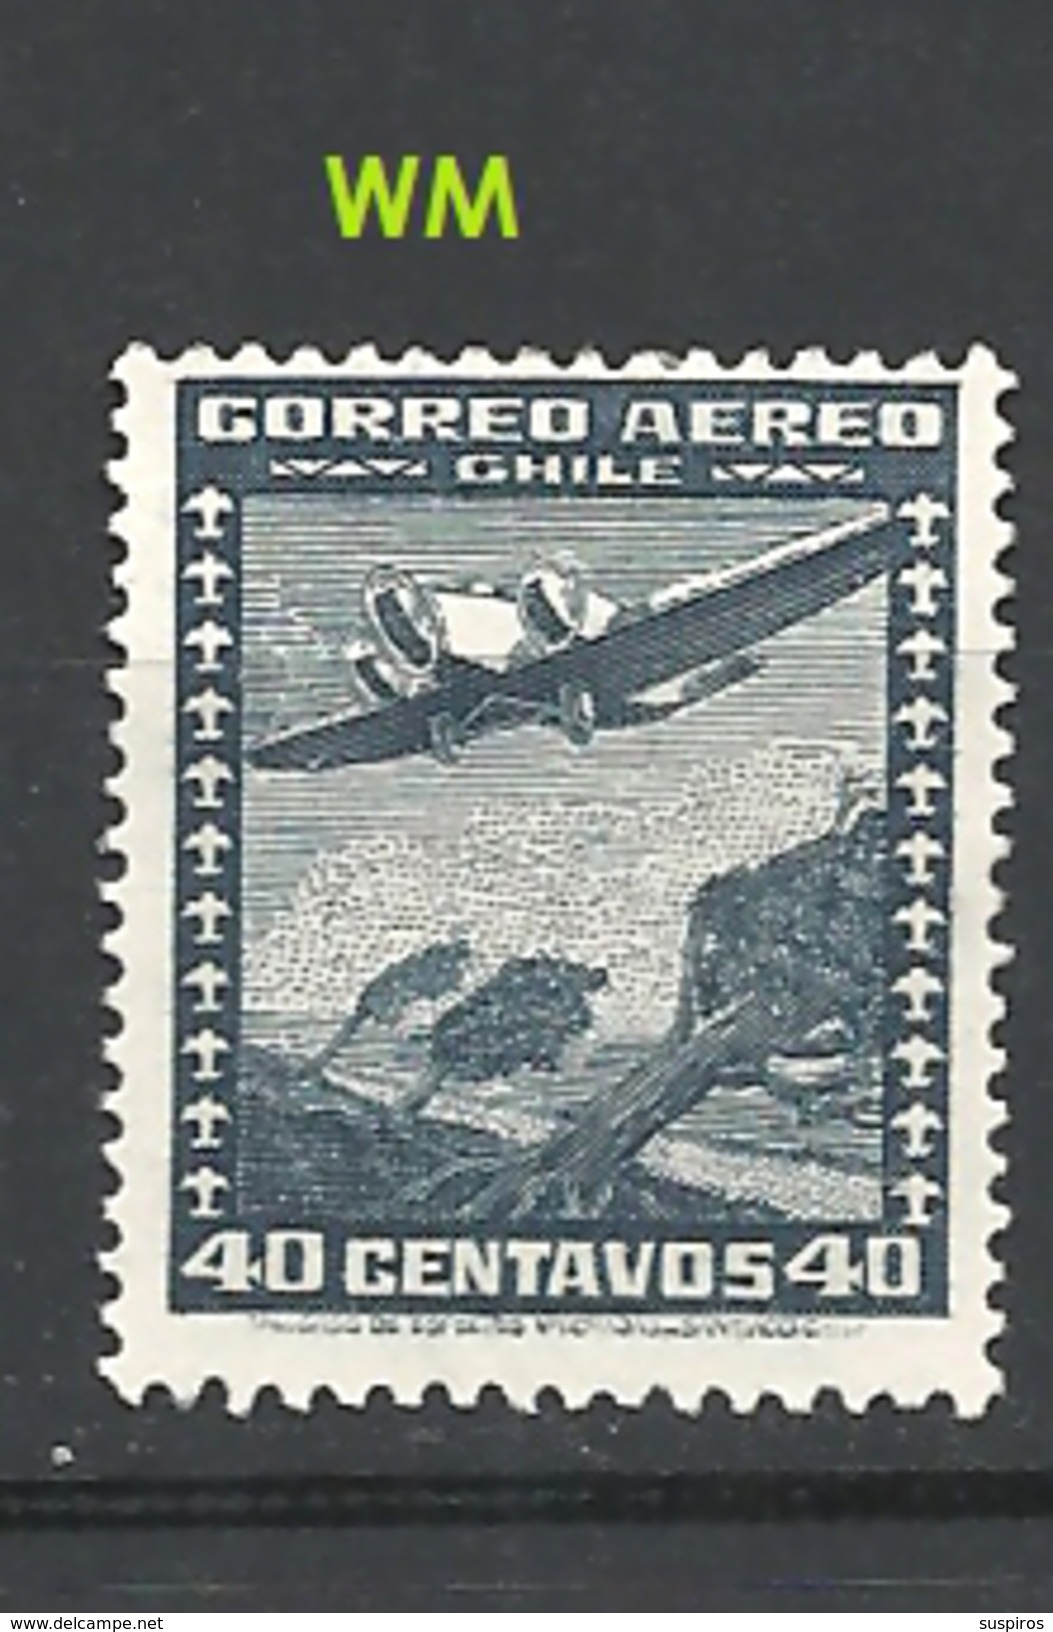 CHILE 1934 -1952 Airmail - Local Motives AIRPLAINS WITH WM USED - Chile